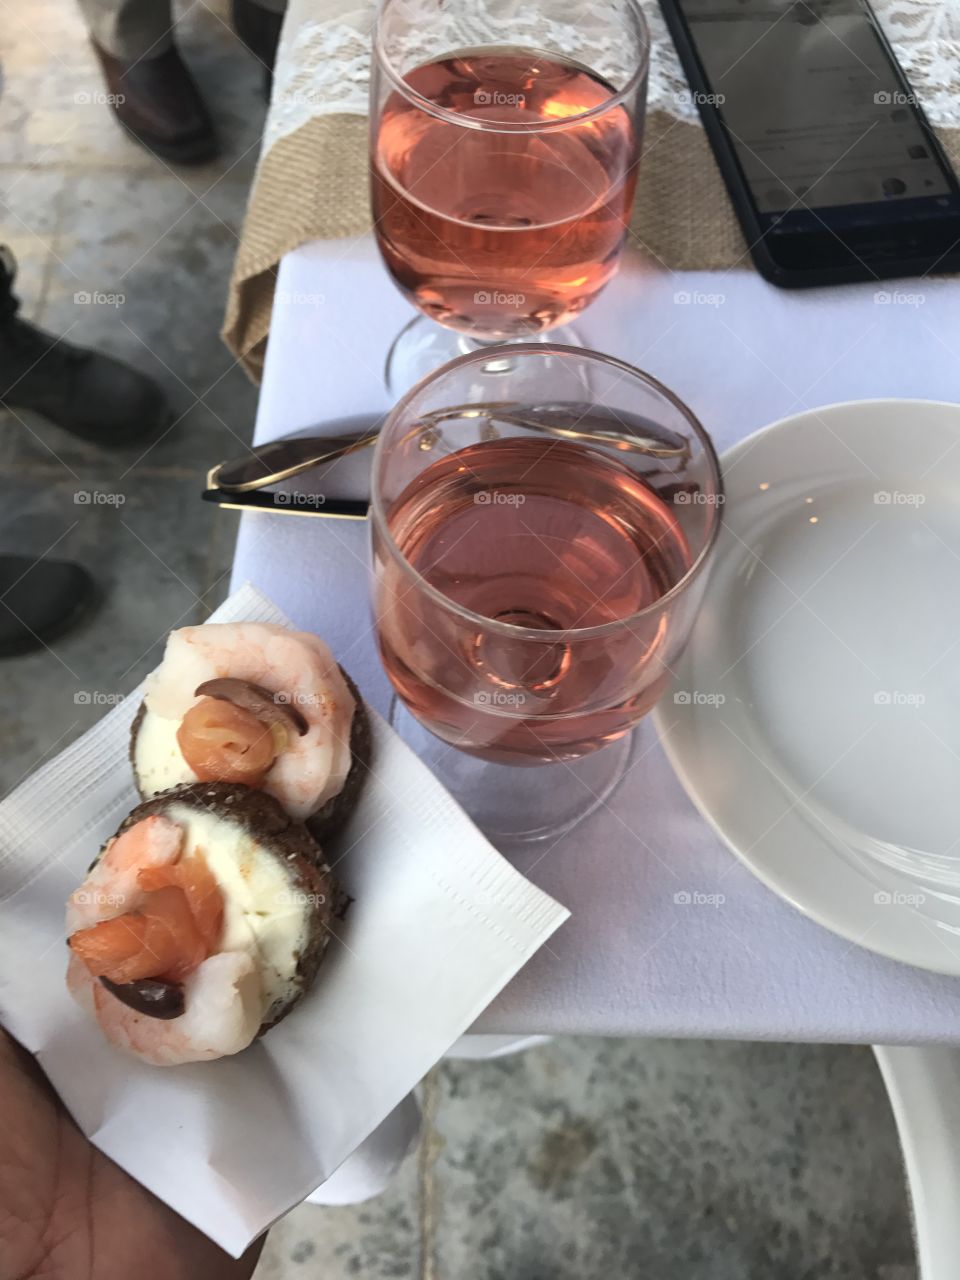 Rose wine and appetizer 